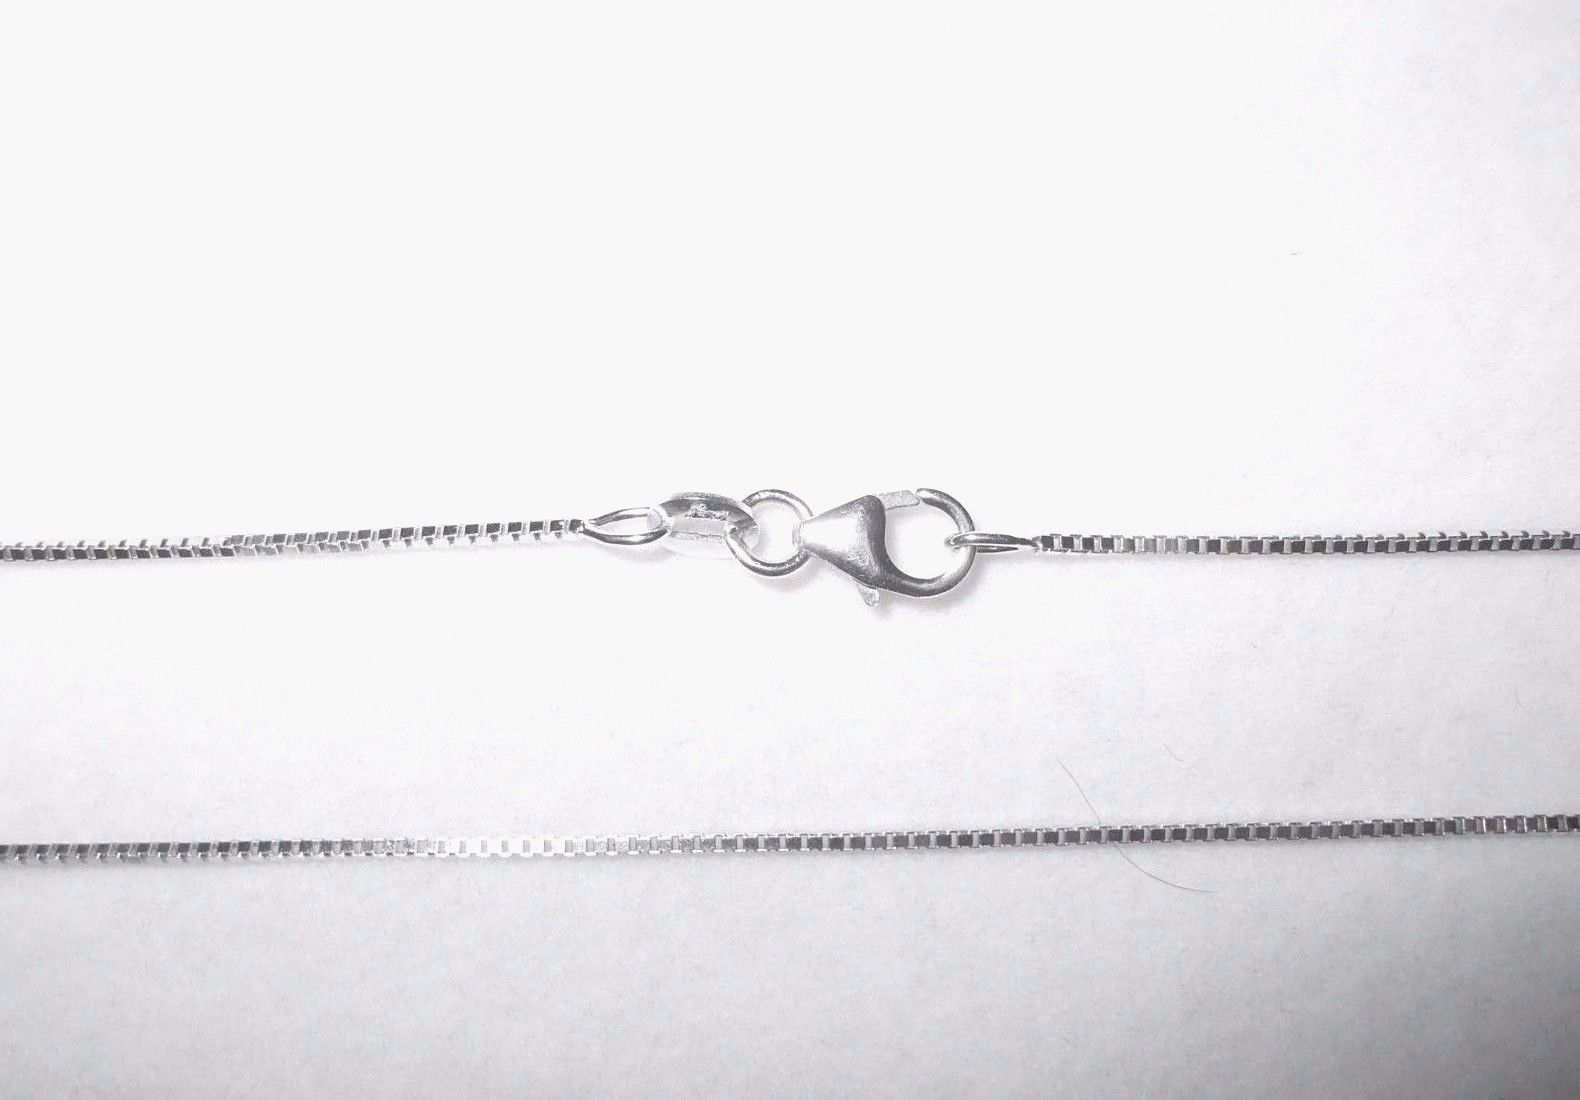 22 inch 14K white gold box chain with lobster clasp 3.1 grams $420